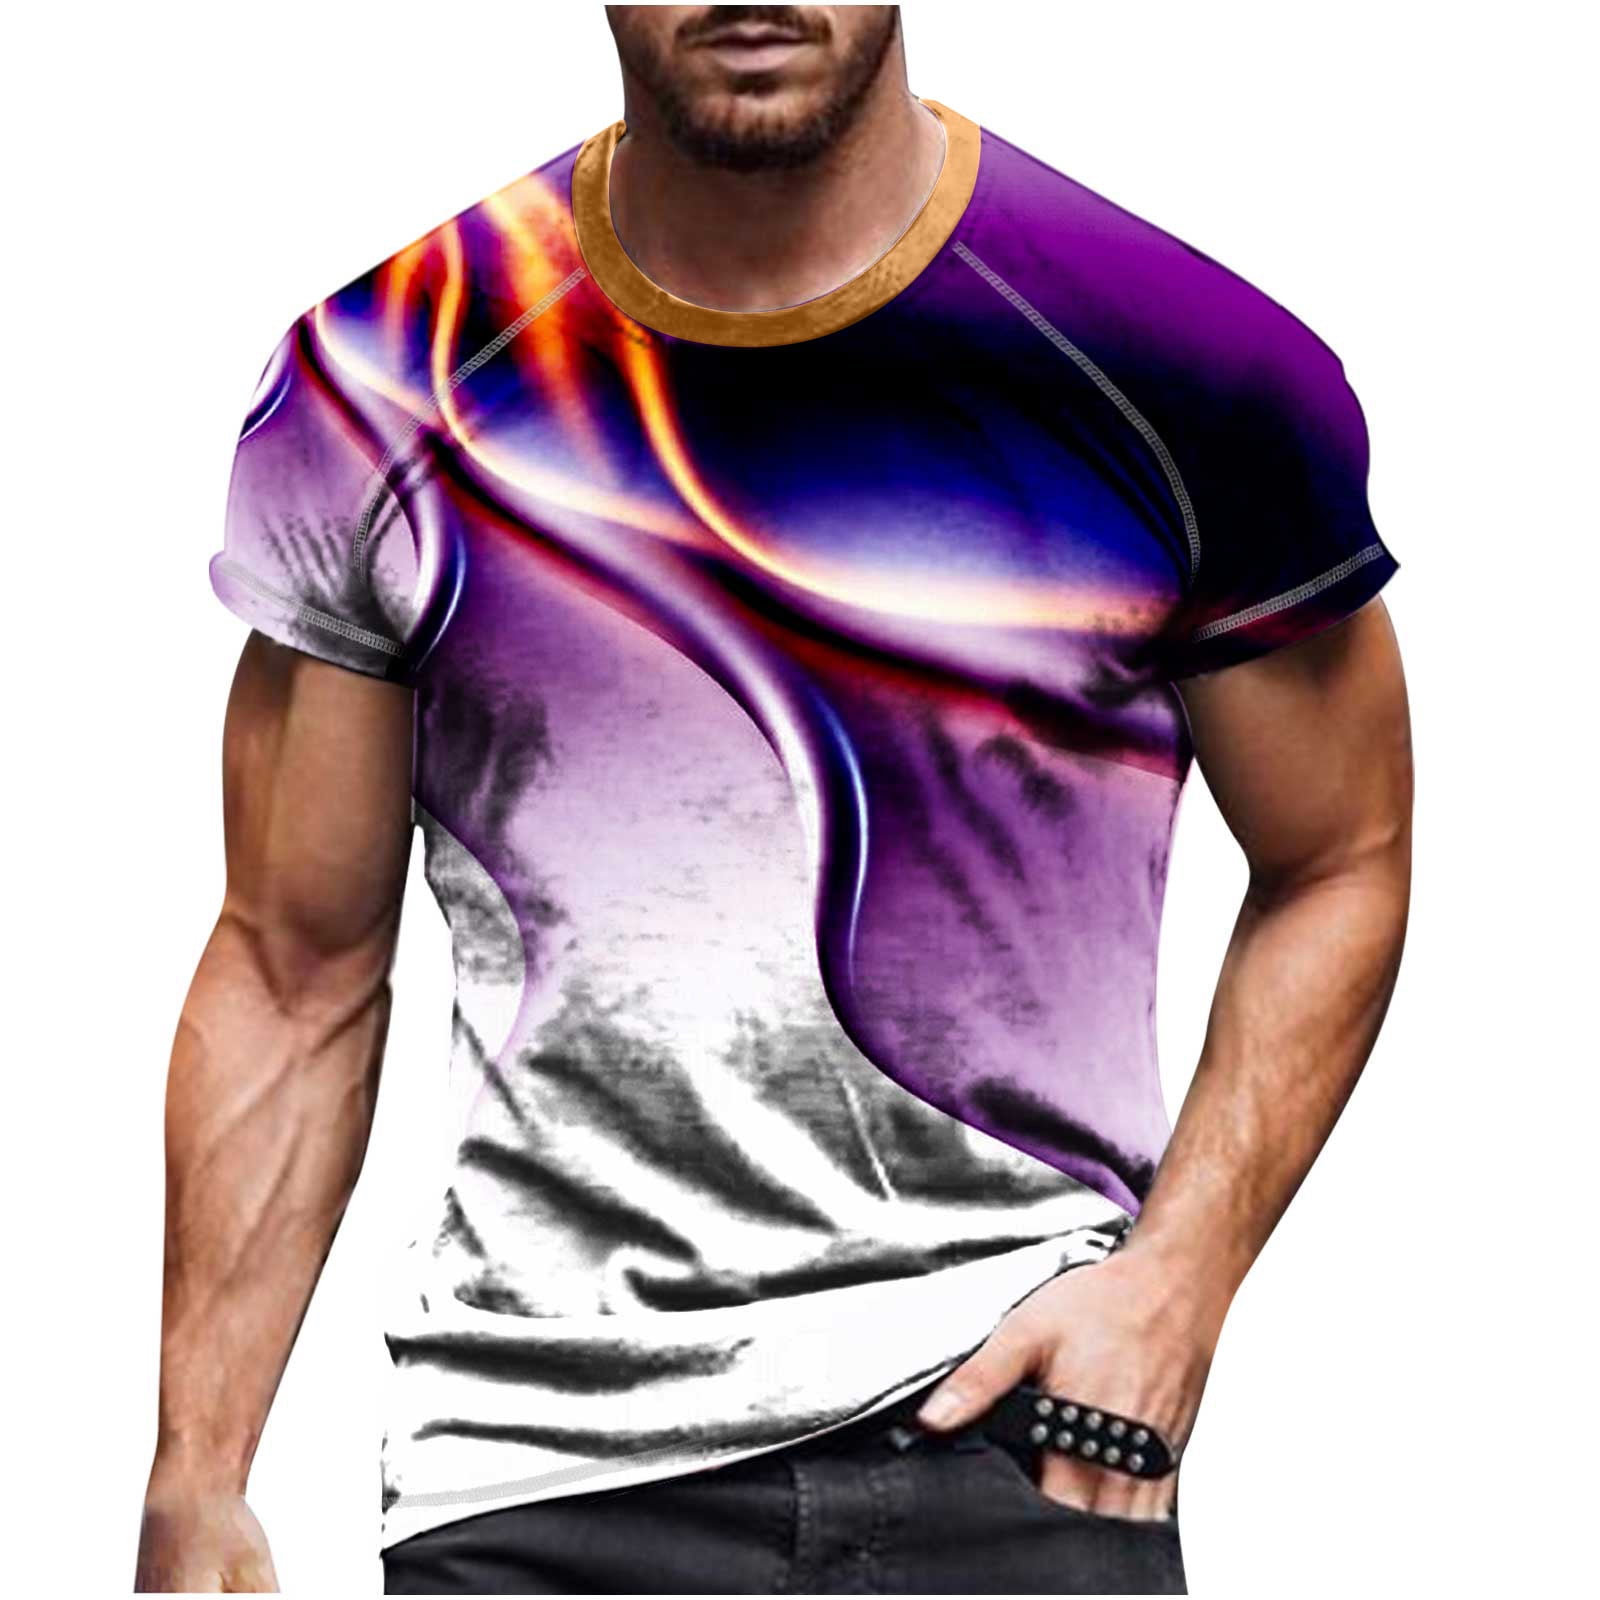 Savings Clearance Summer Muscle Shirts for Men, Men Casual Round Neck Shorts Sleeves T Shirt 3D Digital Printing Fitness Sports T Shirt Blouse Short Sleeve Tee Shirt Purple XL # Today